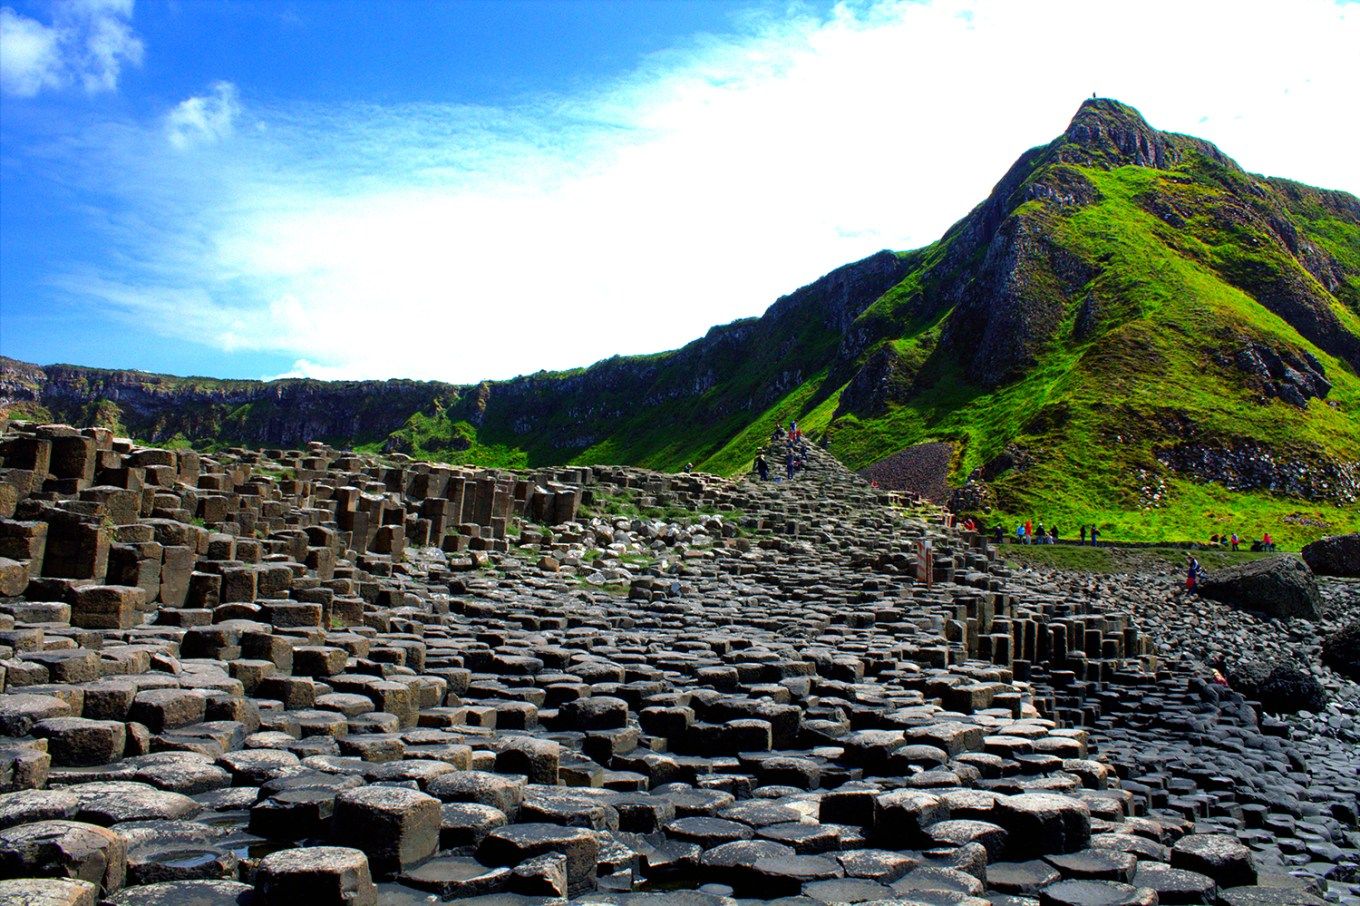 Mingling With Giants At The Giant's Causeway in Northern Ireland